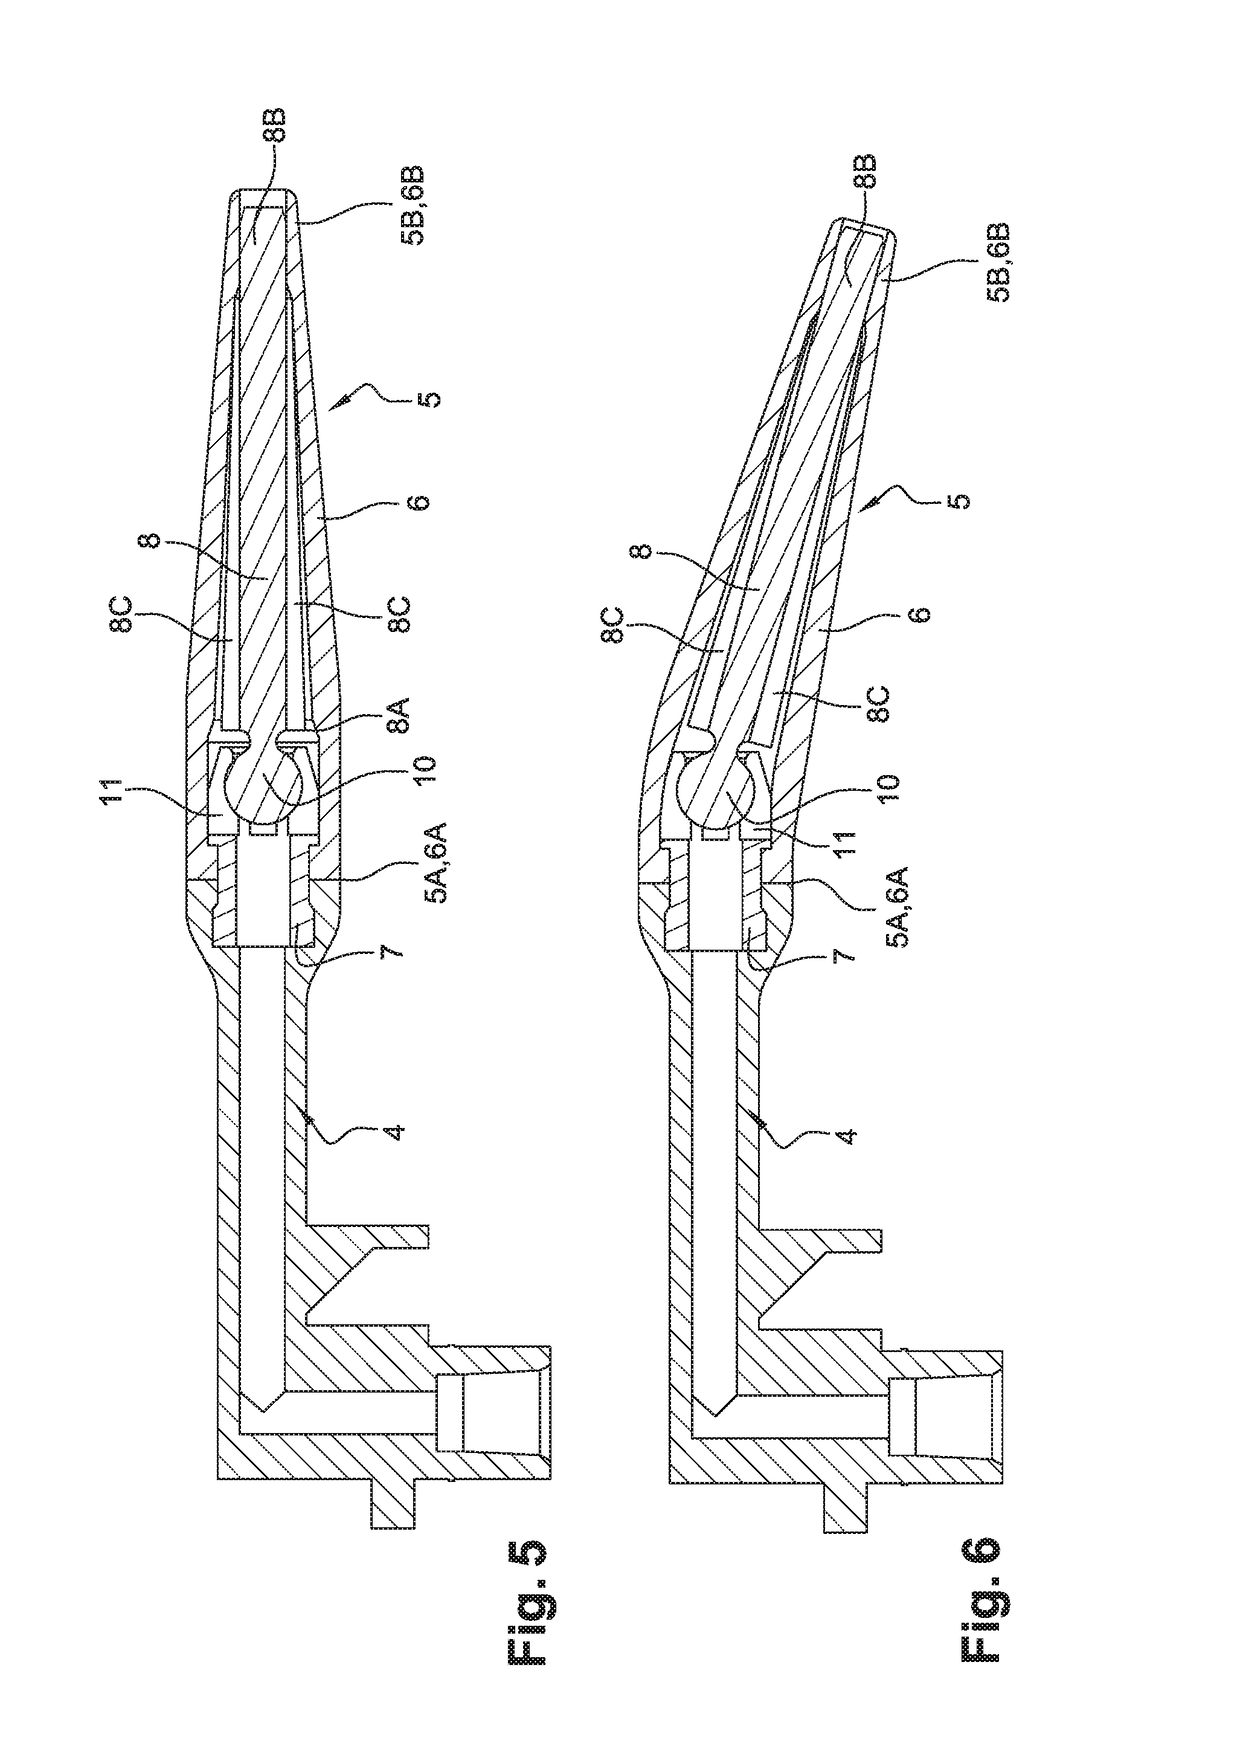 Device for packaging and dispensing fluid, liquid or pasty products